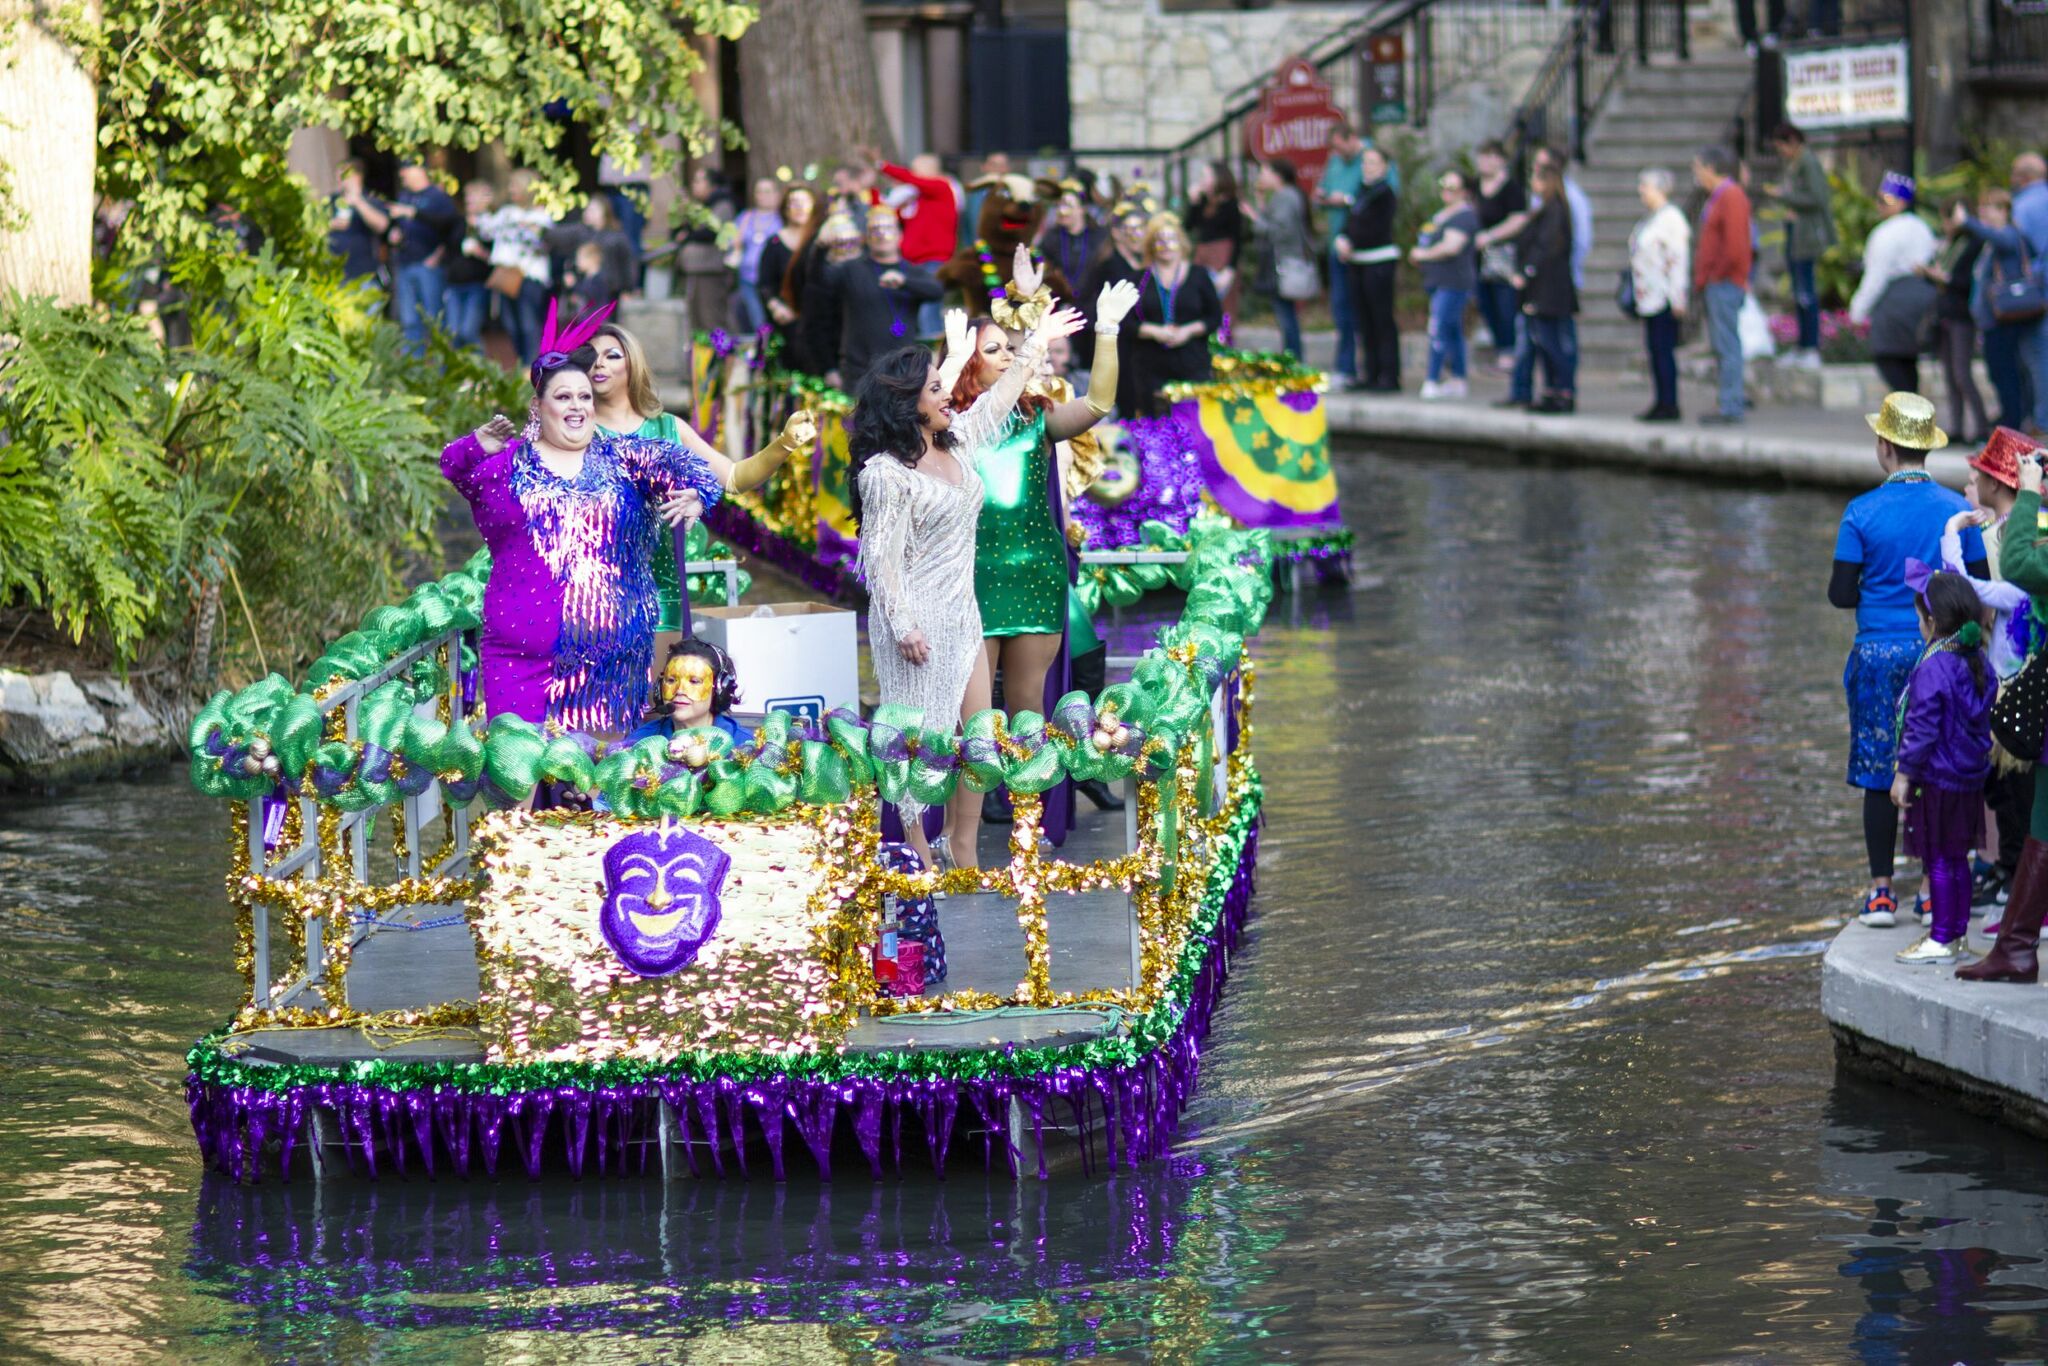 Fat Tuesday in San Antonio means River Walk parades, crawfish and more